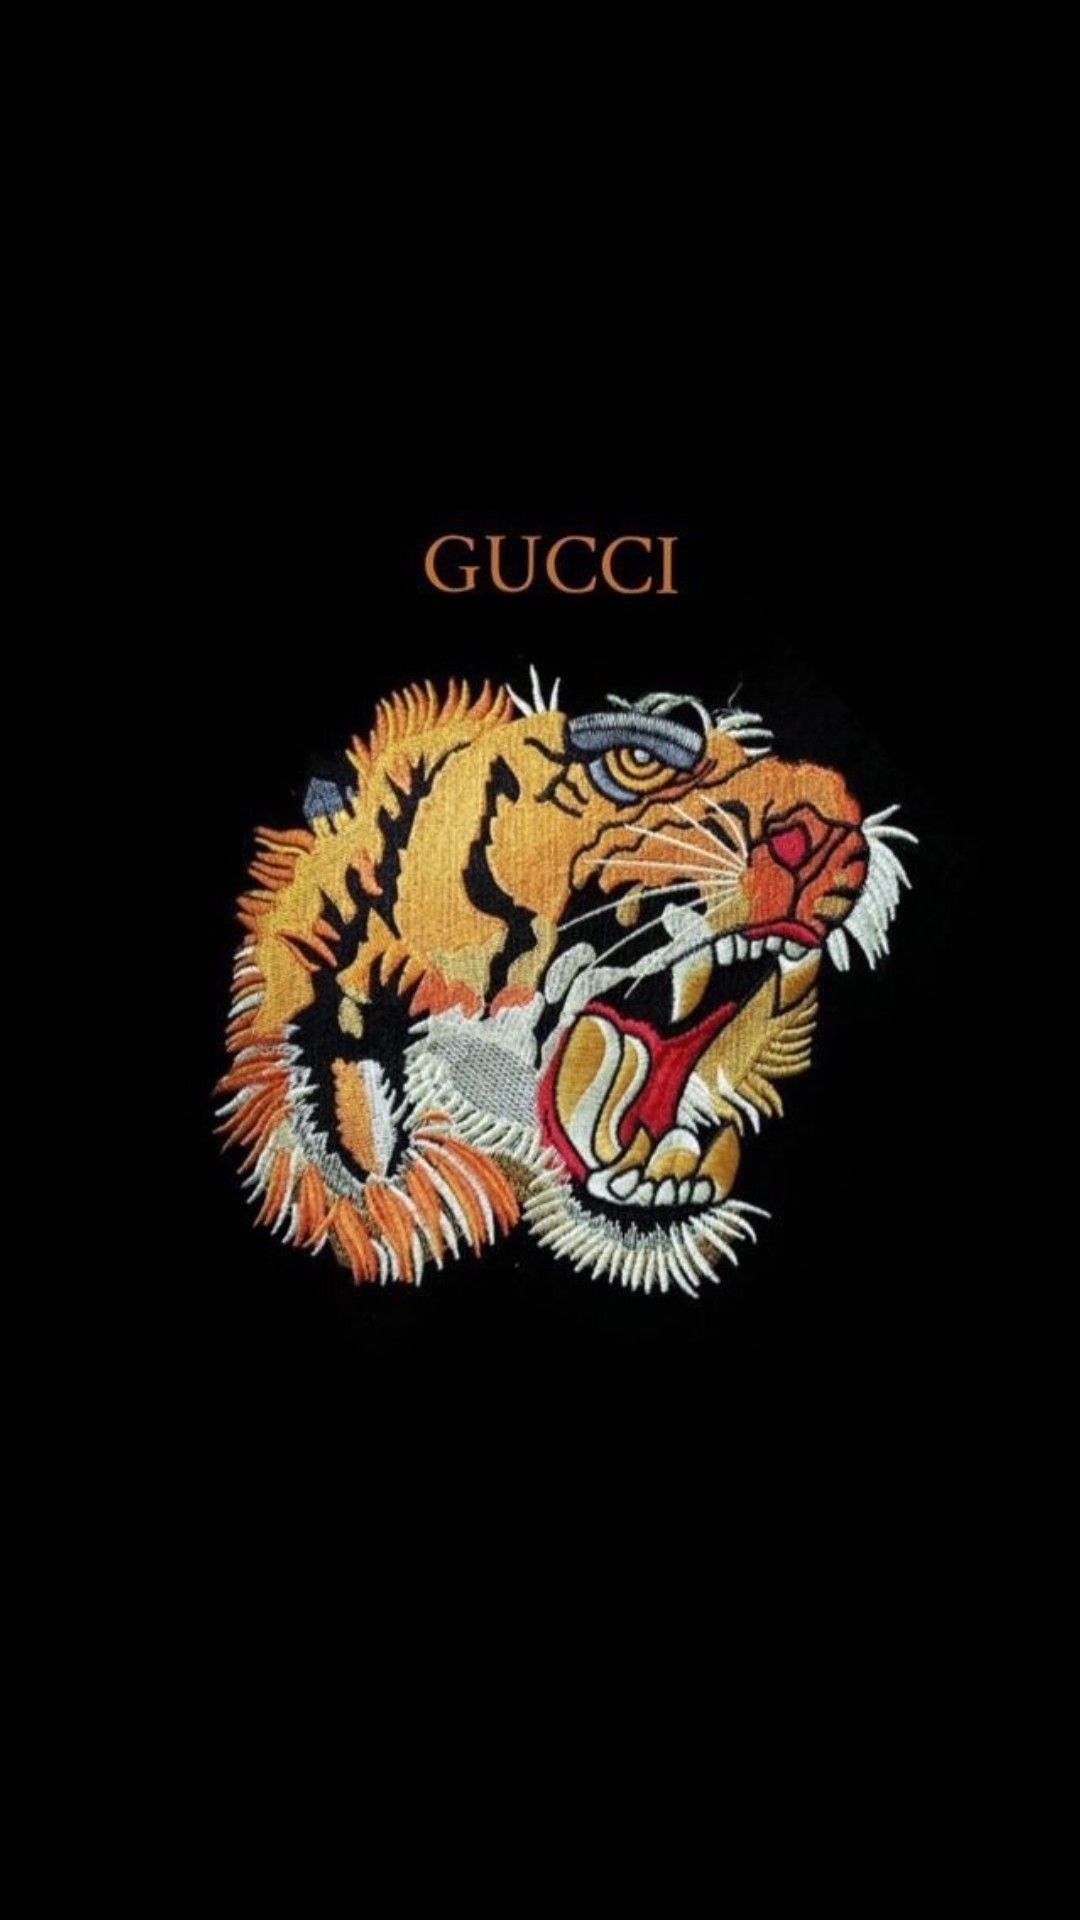 Gucci: Tiger symbol, Gucci Tiger collection campaign, A member of The Lion's Share Fund since February, 2020. 1080x1920 Full HD Wallpaper.